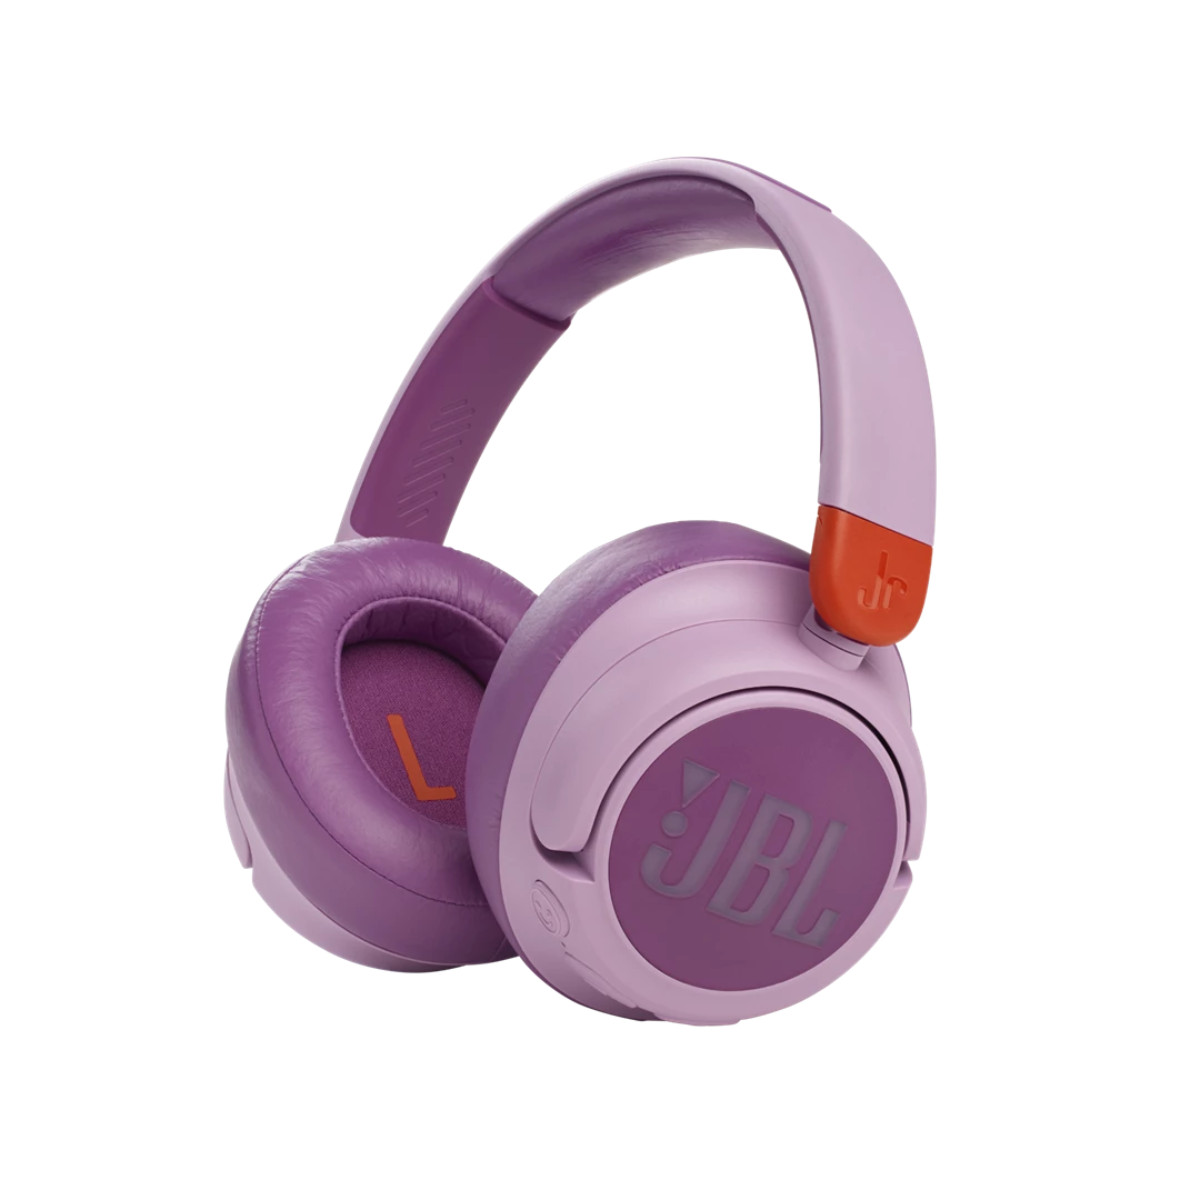 JBL JR460NC Wireless Headphone with Noise Cancellation - pink